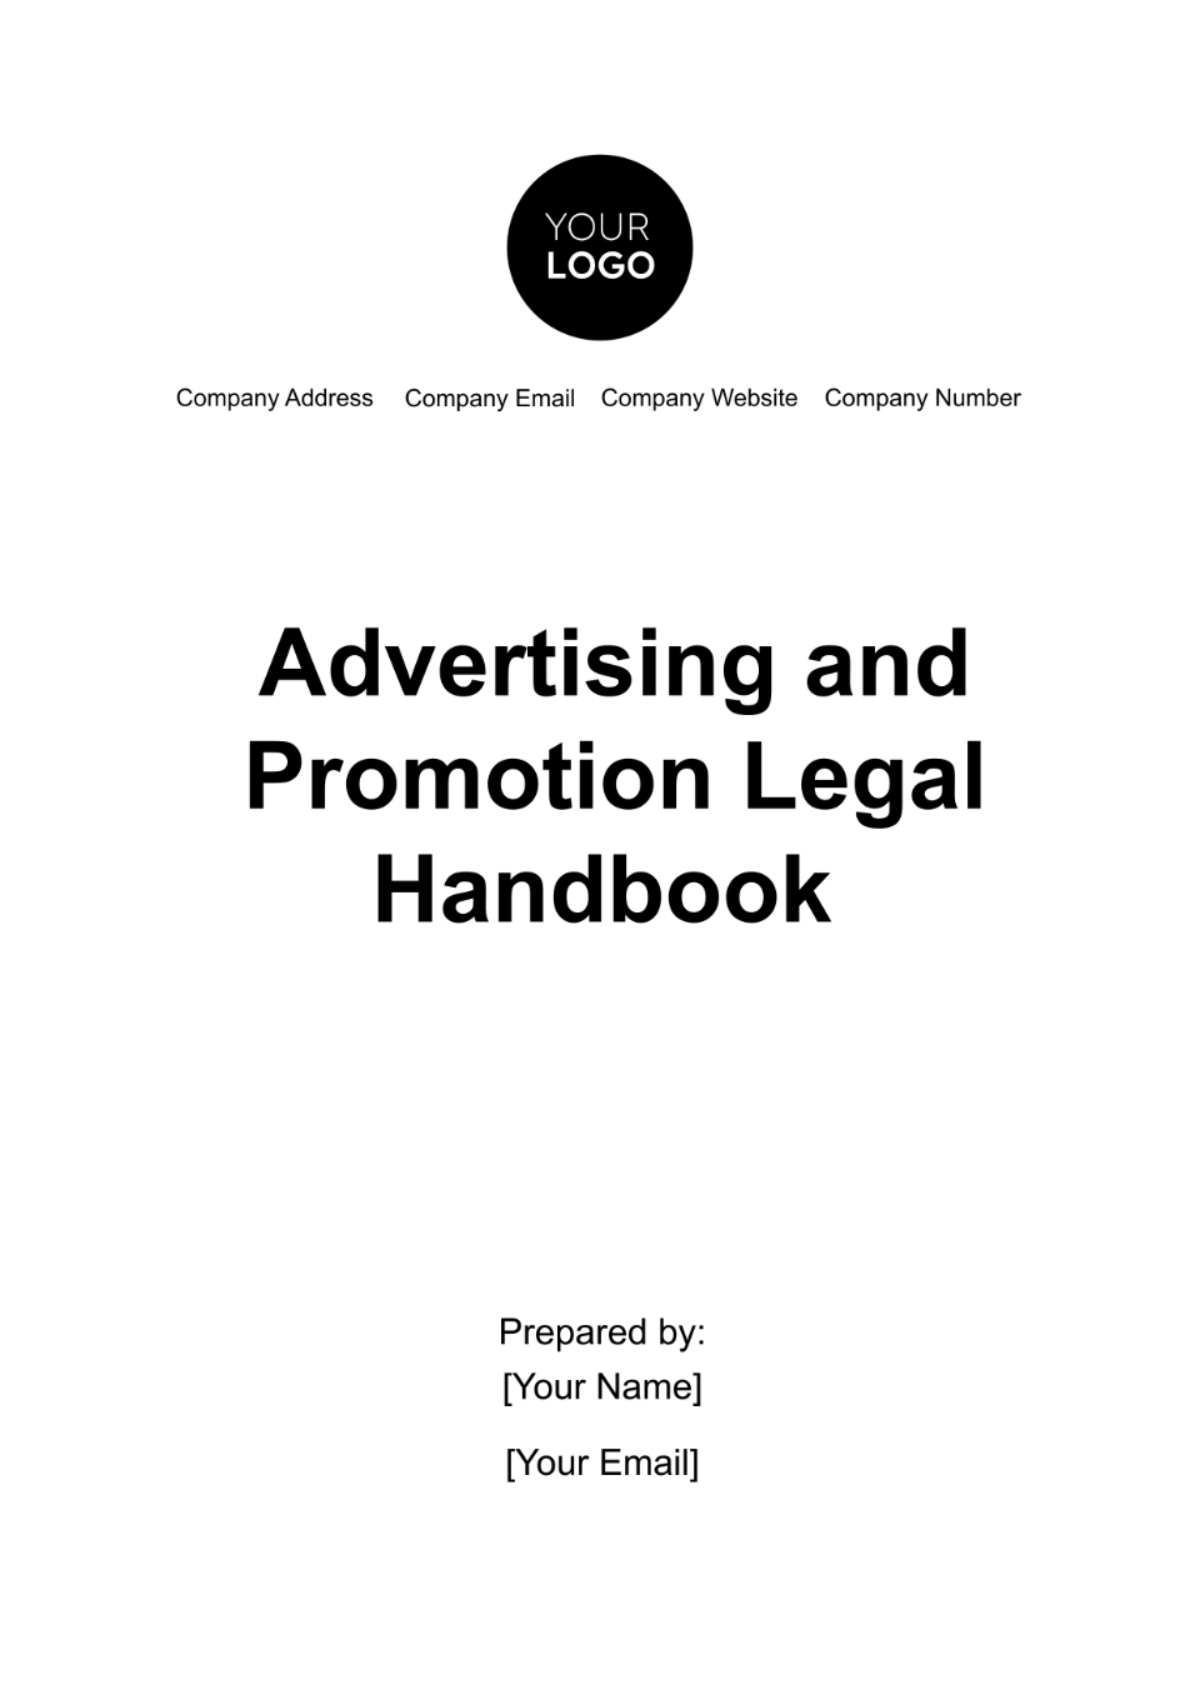 Free Advertising and Promotion Legal Handbook Template